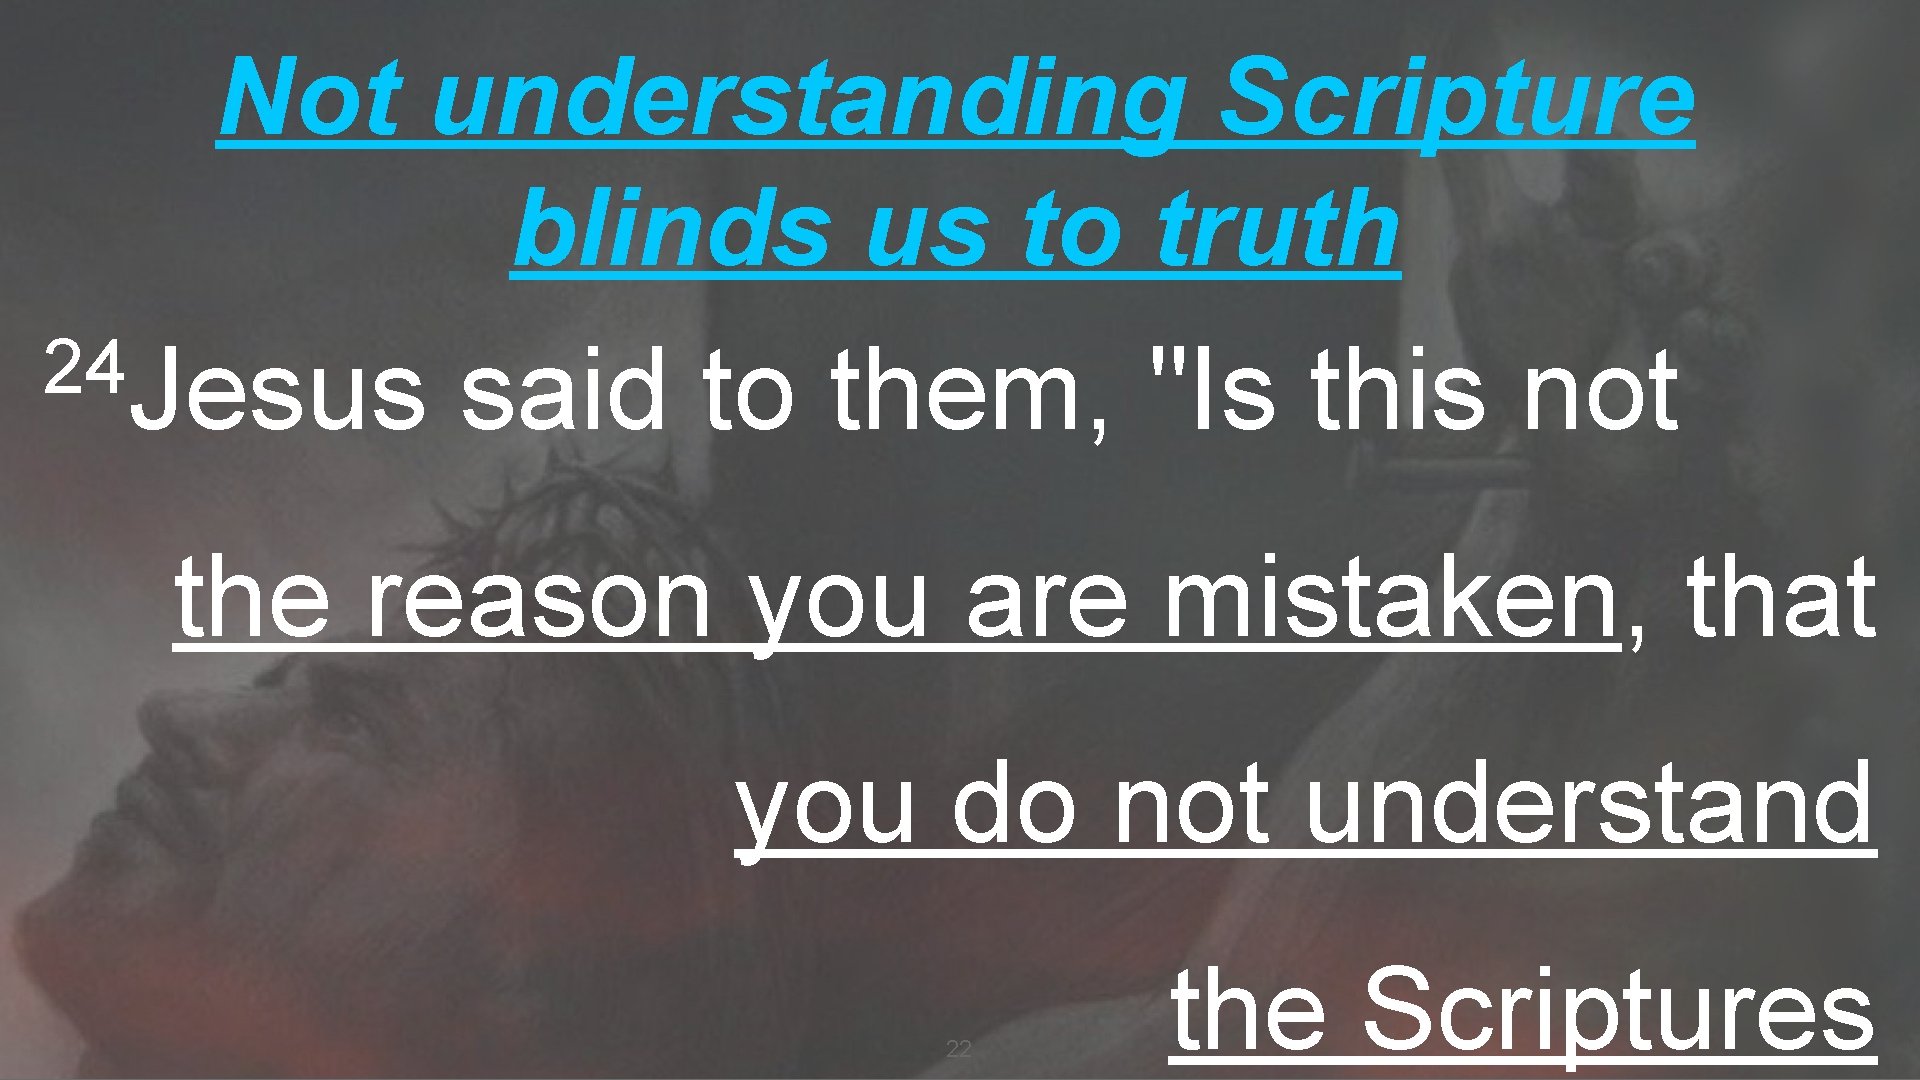 Not understanding Scripture blinds us to truth 24 Jesus said to them, "Is this